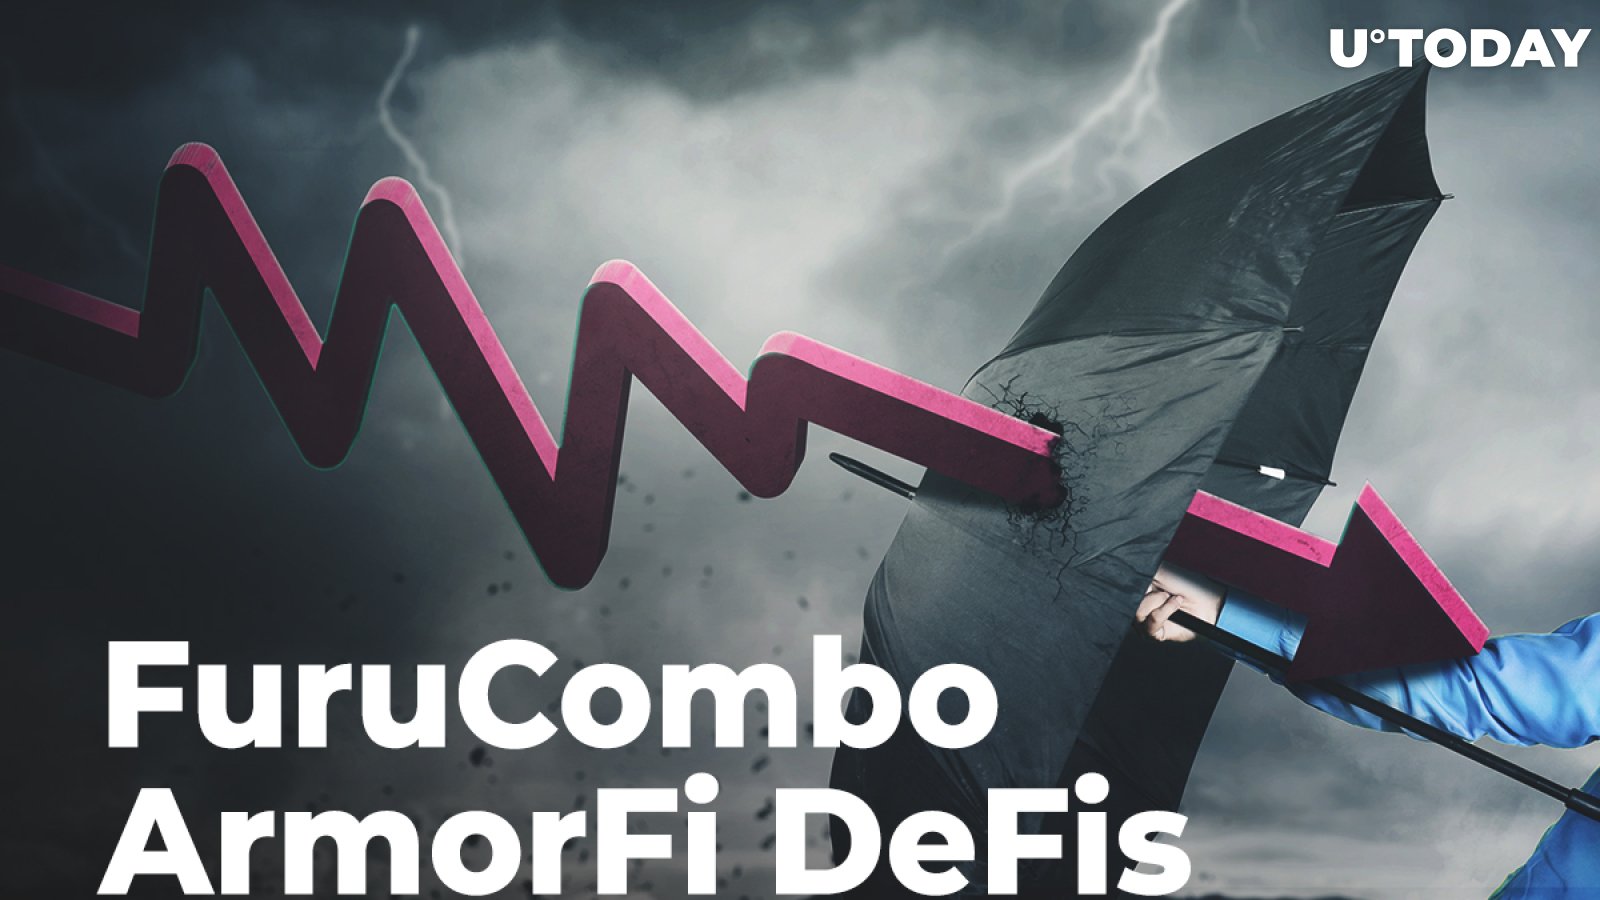 FuruCombo (COMBO) and ArmorFi (ARMOR) DeFis Attacked Today, $15 Million Lost. Here's What Happened